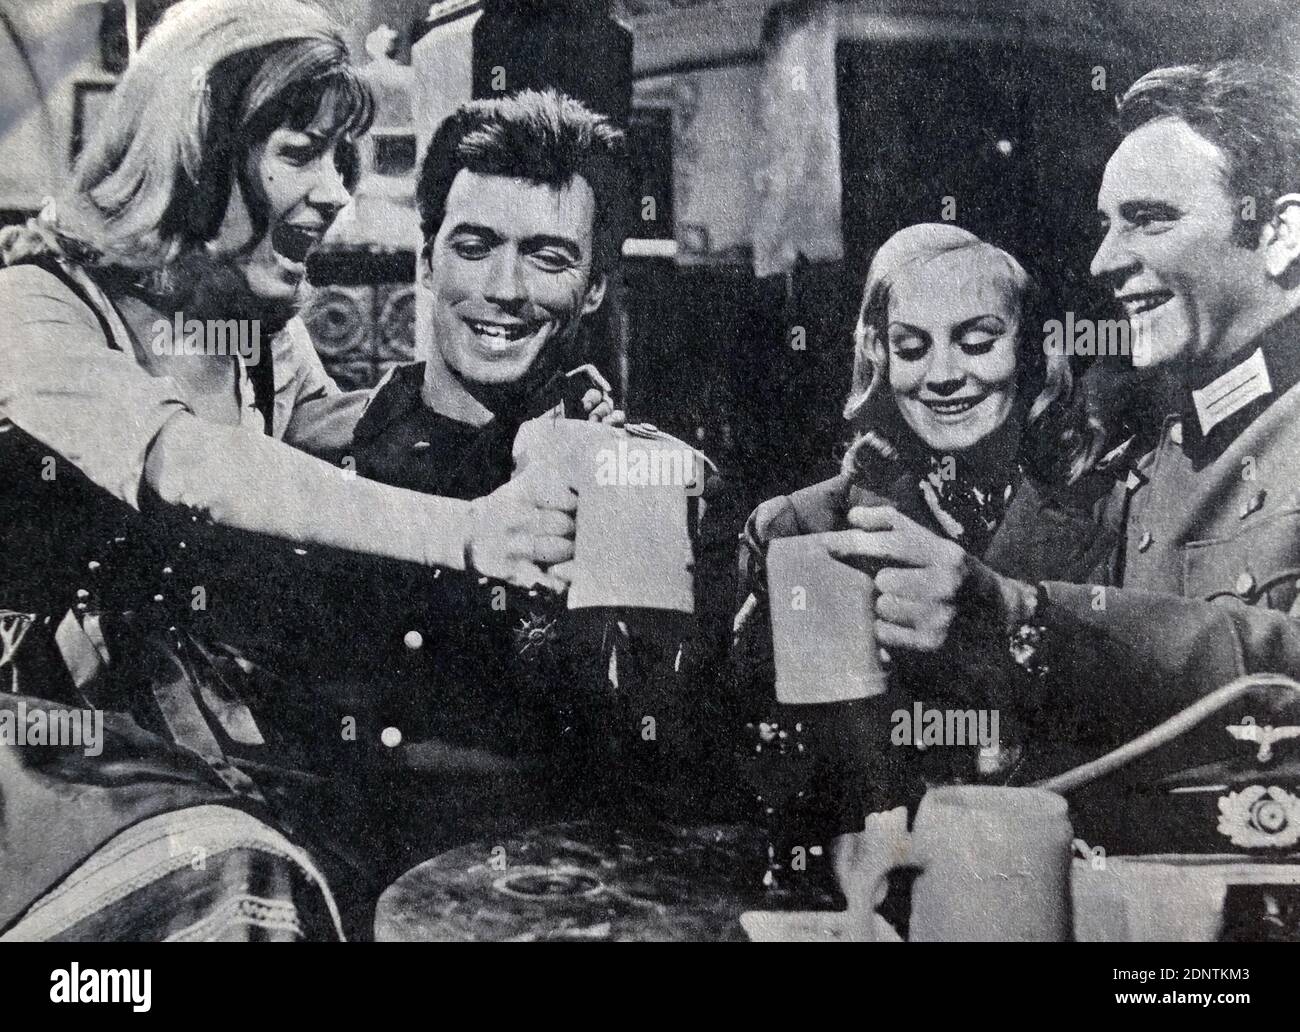 Film still of Ingrid Pitt (1937-2010), Clint Eastwood (1930-), Mary Ure (1933-1975) and Richard Burton (1925-1984) from 'Where Eagles Dare'. Stock Photo